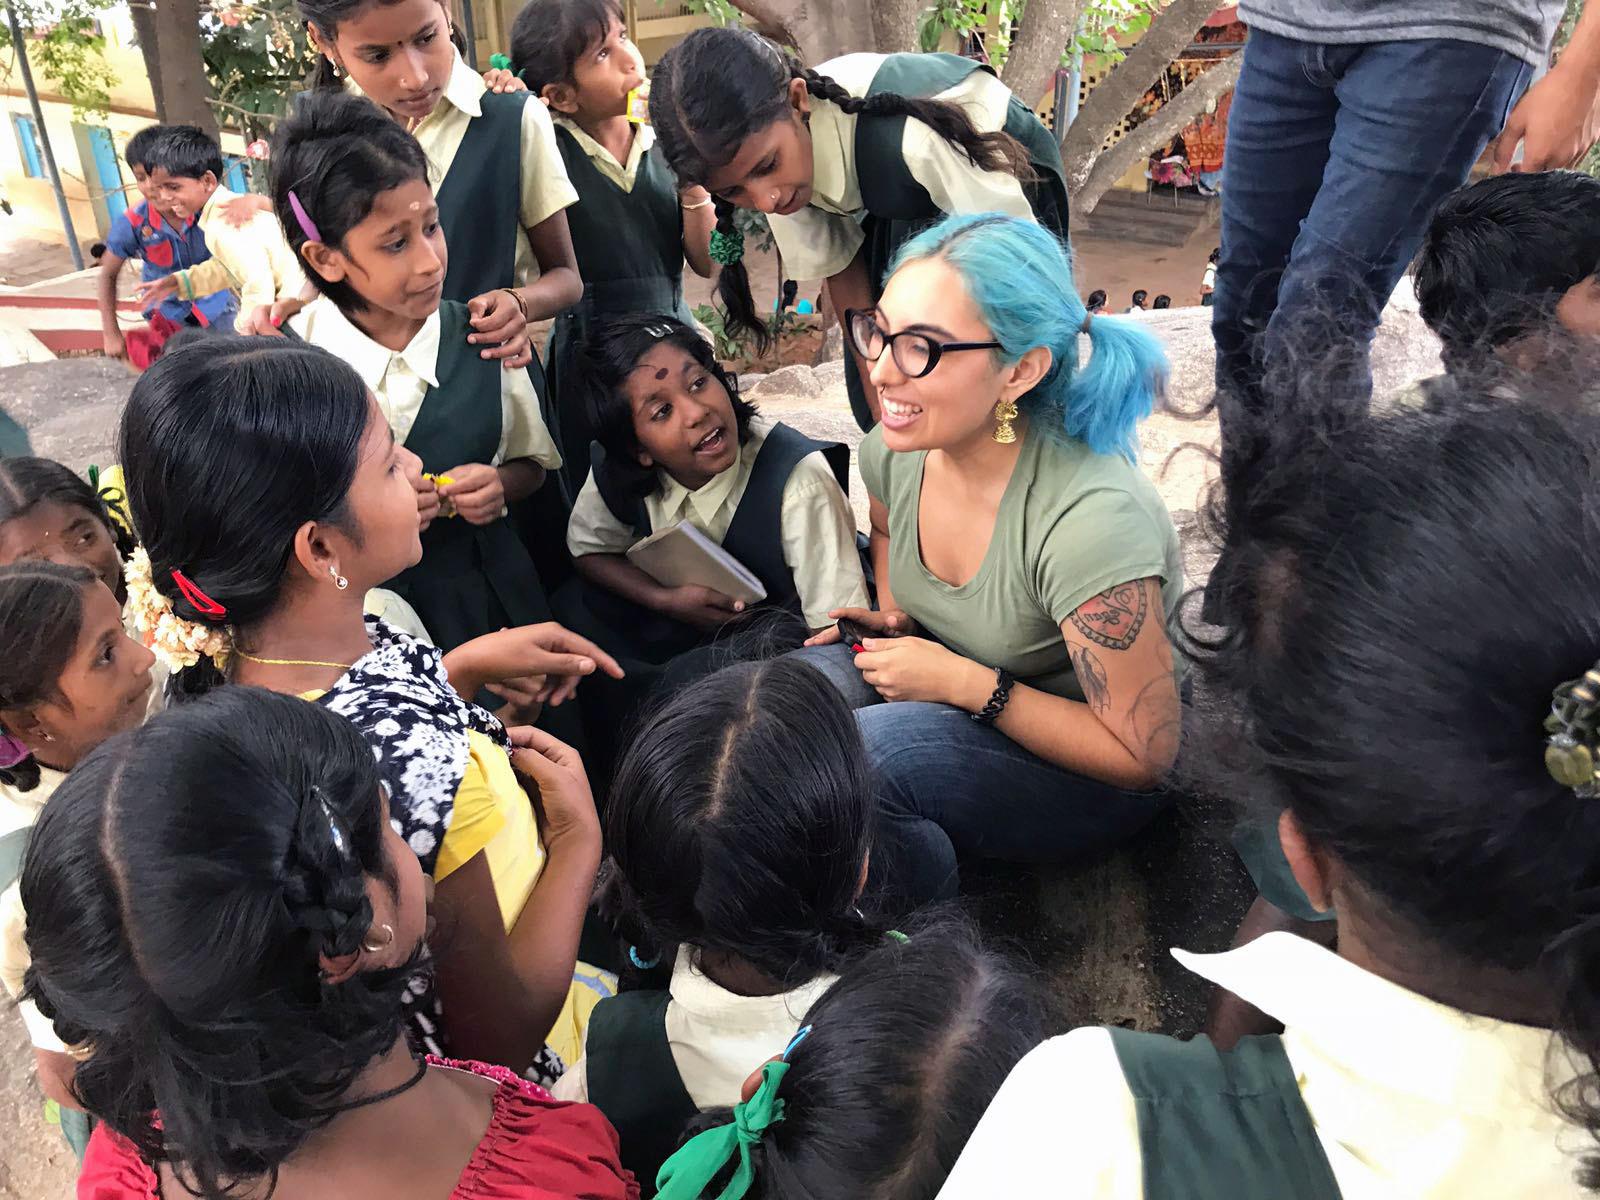 Smiling Cal State LA student sitting on the ground surrounded by listening young school students in India.